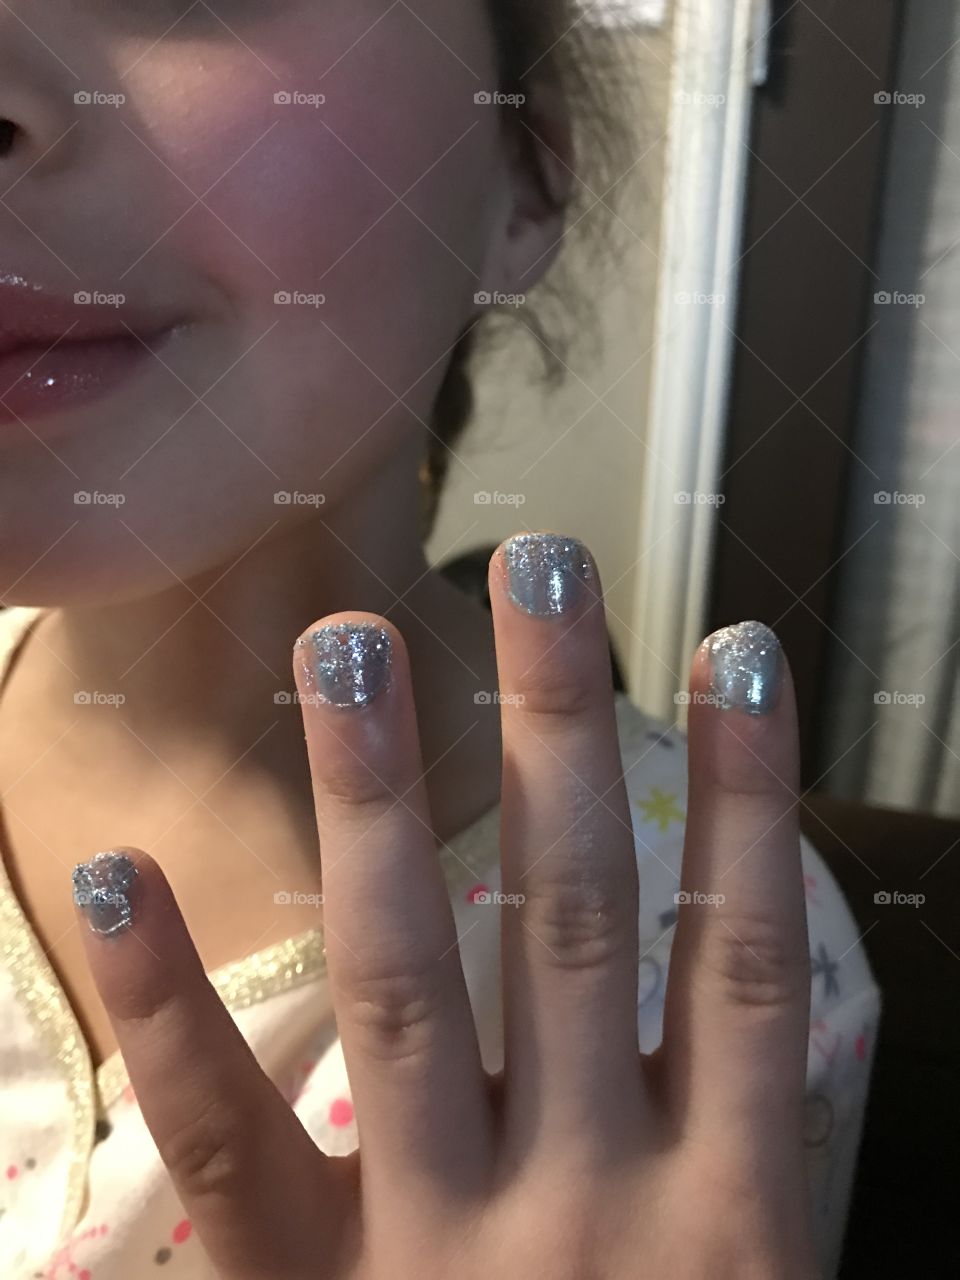 7 year old's beauty routine. Bubble gum scented nail polish and GLITTER!!!